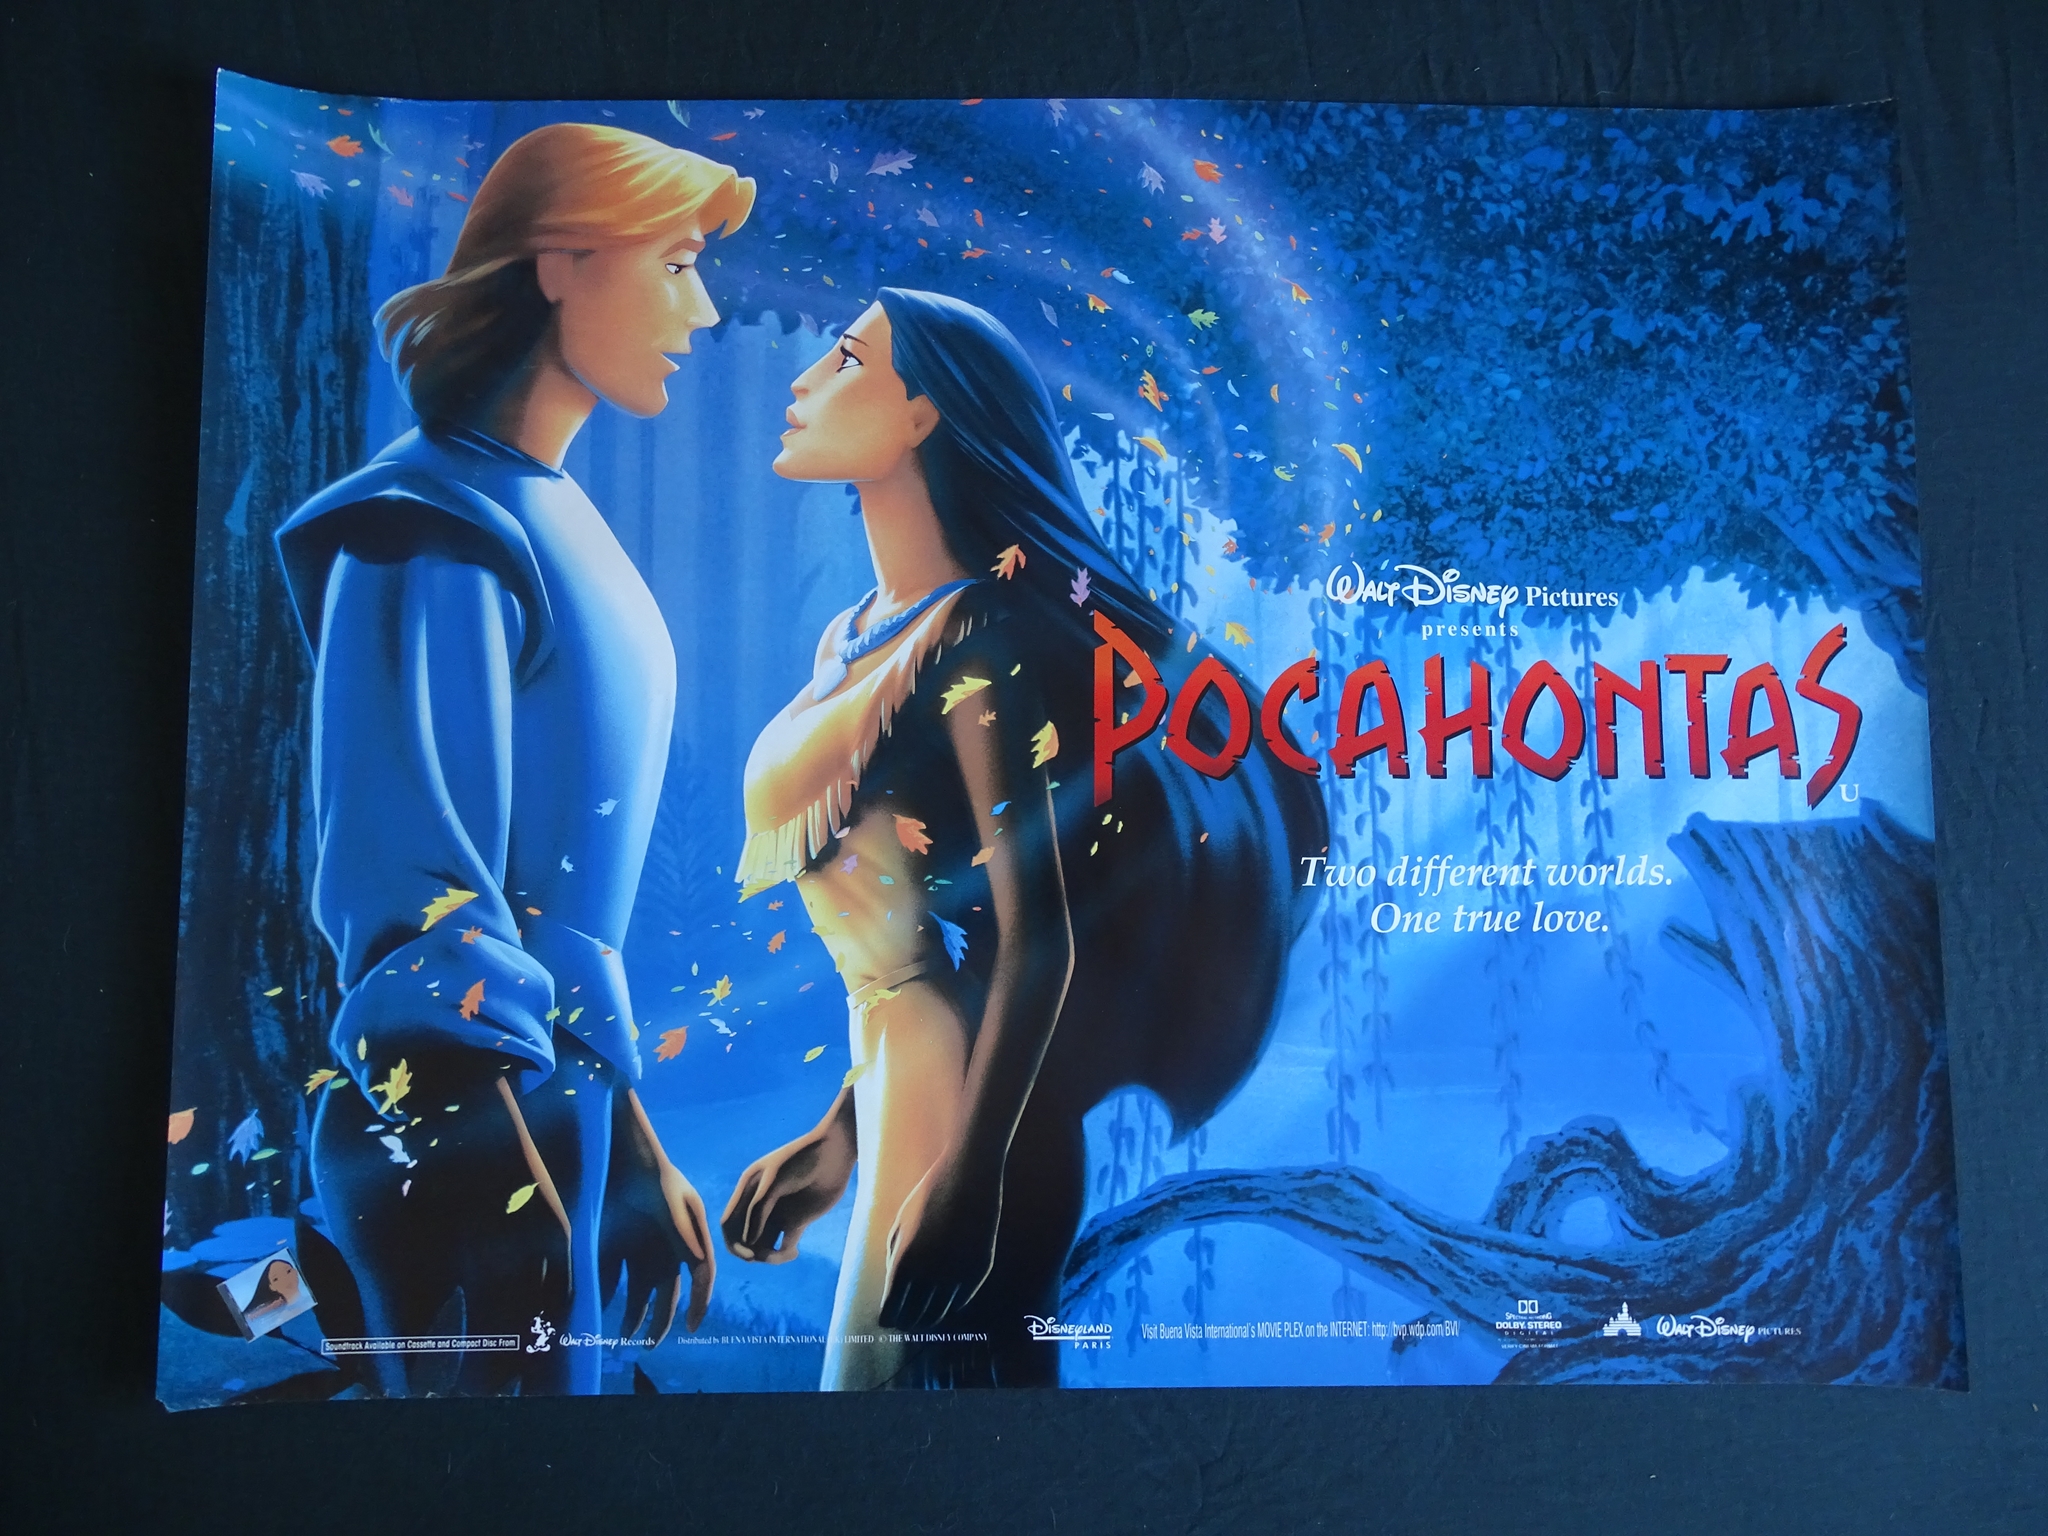 DISNEY: LOT of 12 UK QUADS (1990S/00) - THE HUNCHBACK OF NOTREDAME; FROZEN; A 102 DALMATIANS, MULAN, - Image 9 of 12